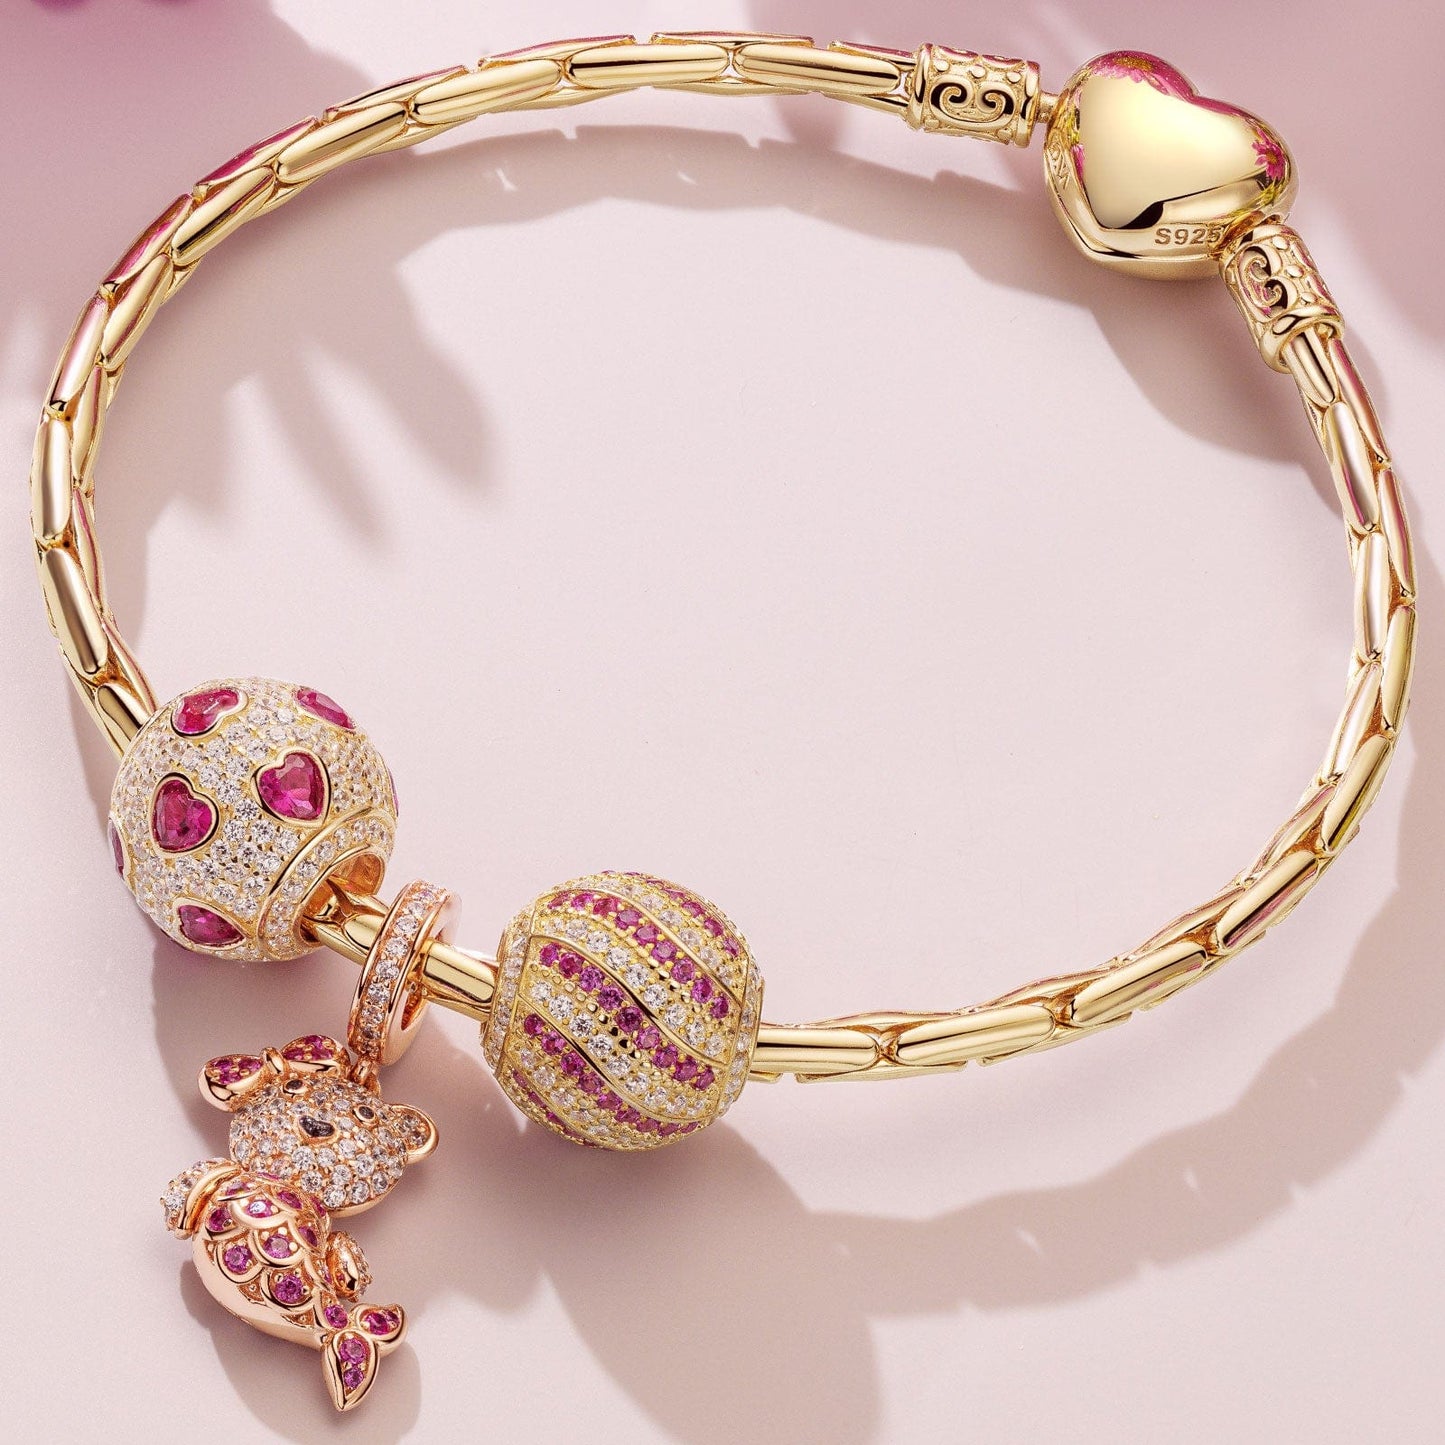 Sterling Silver Pink Mermaid Fish Charms Bracelet Set With Enamel In 14K Gold Plated